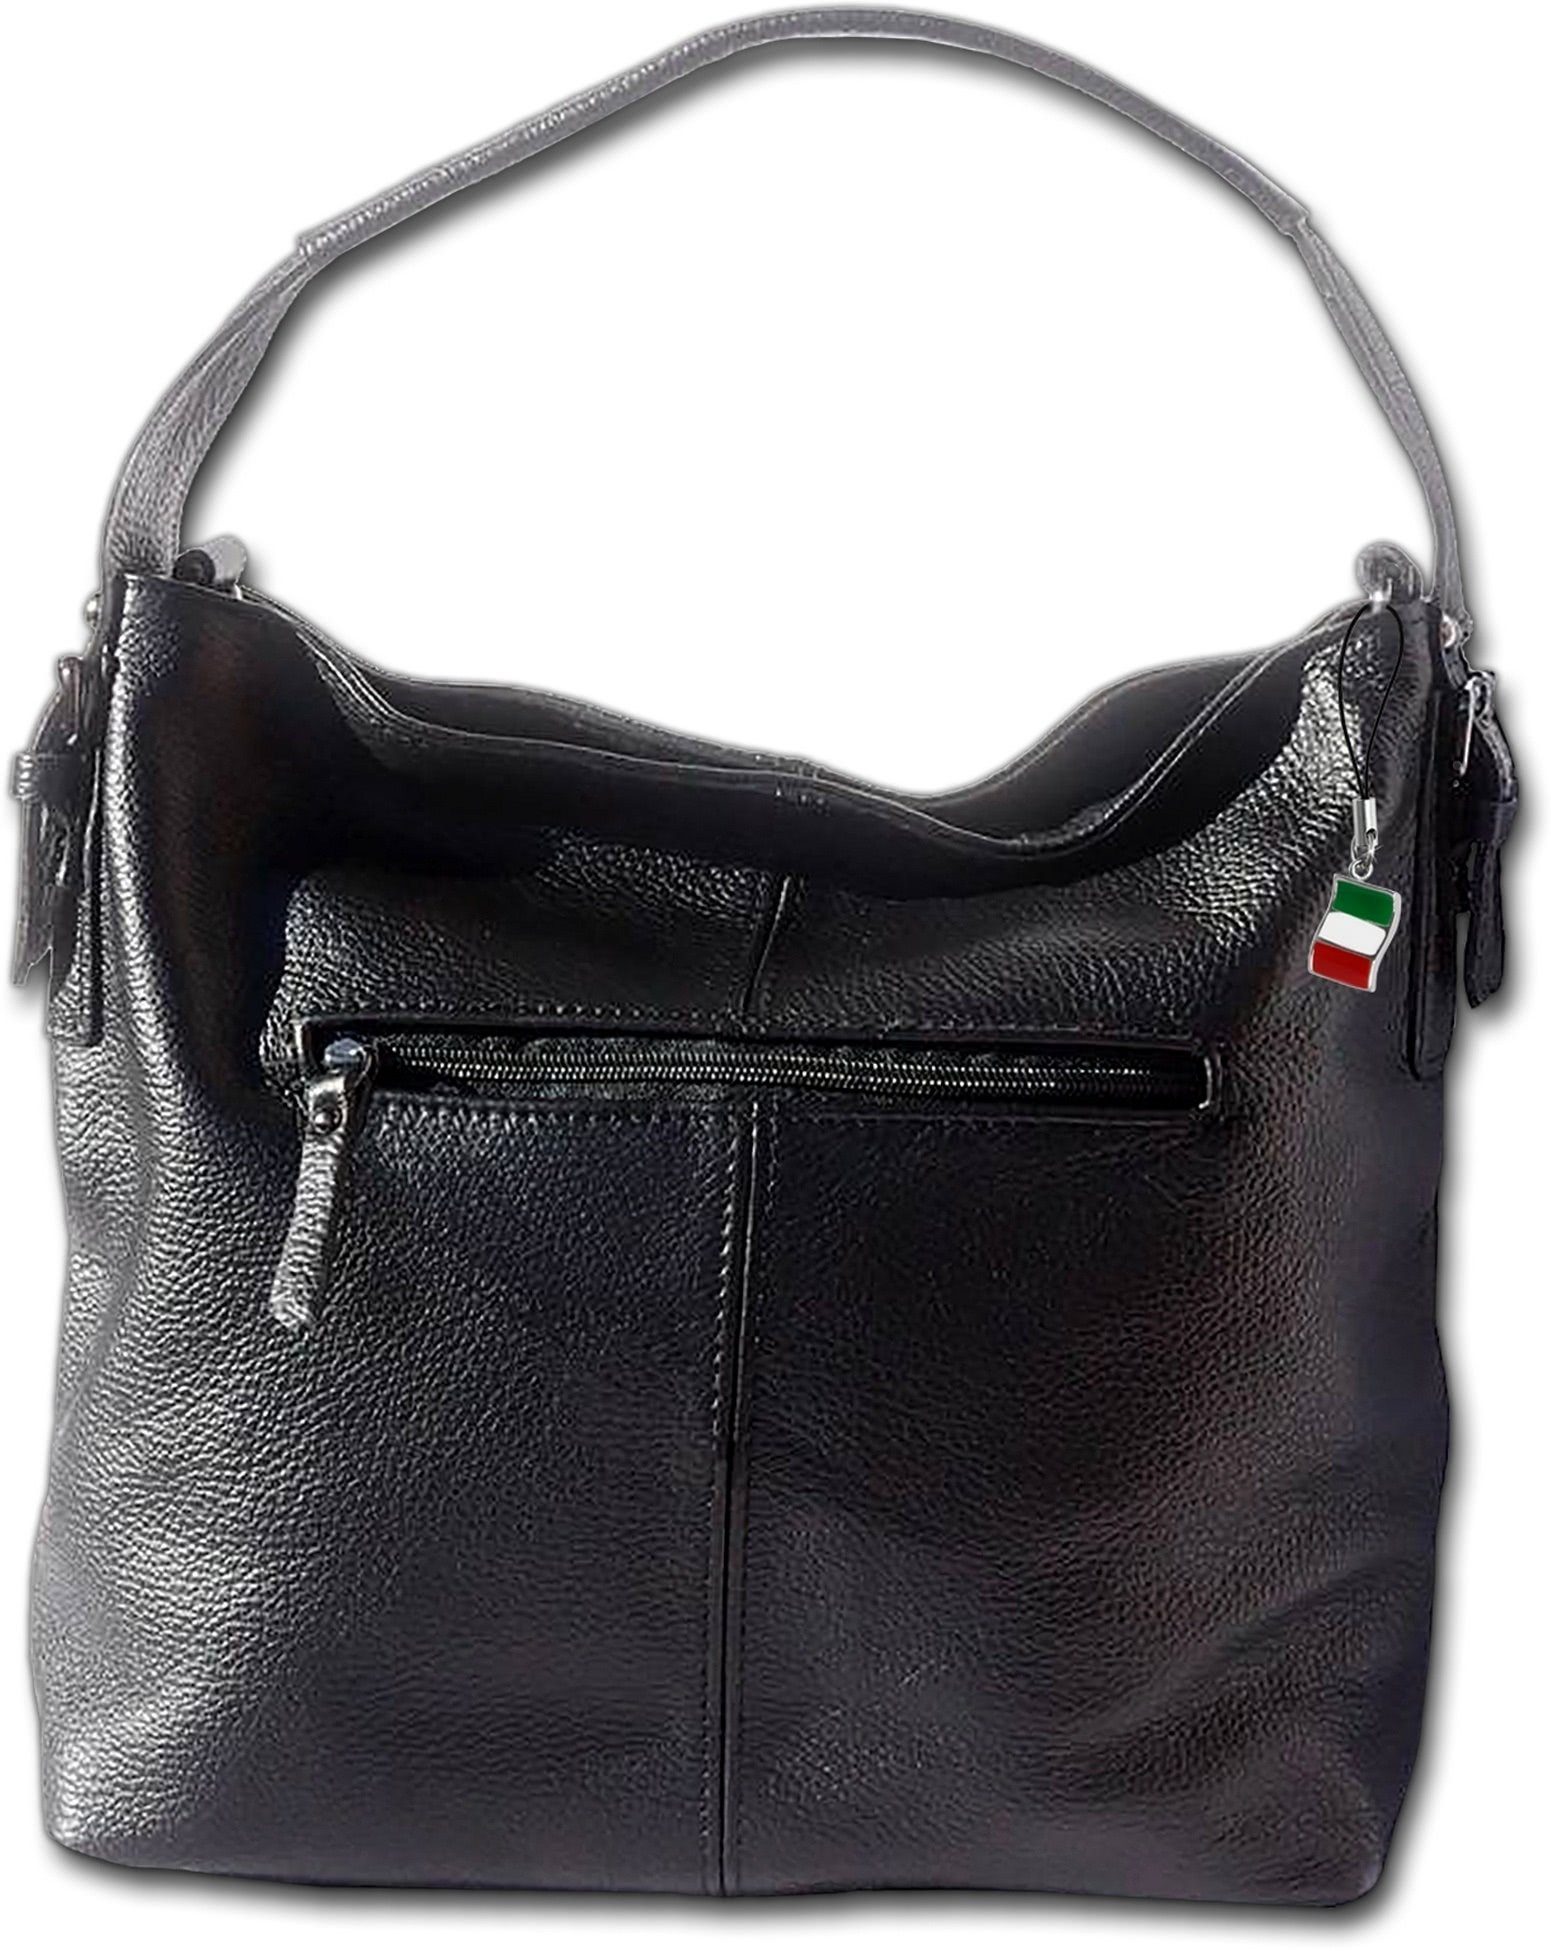 FLORENCE Shopper Florence ital. Schultertasche Echtleder (Shopper, Shopper), Damen Tasche Echtleder schwarz, Made-In Italy